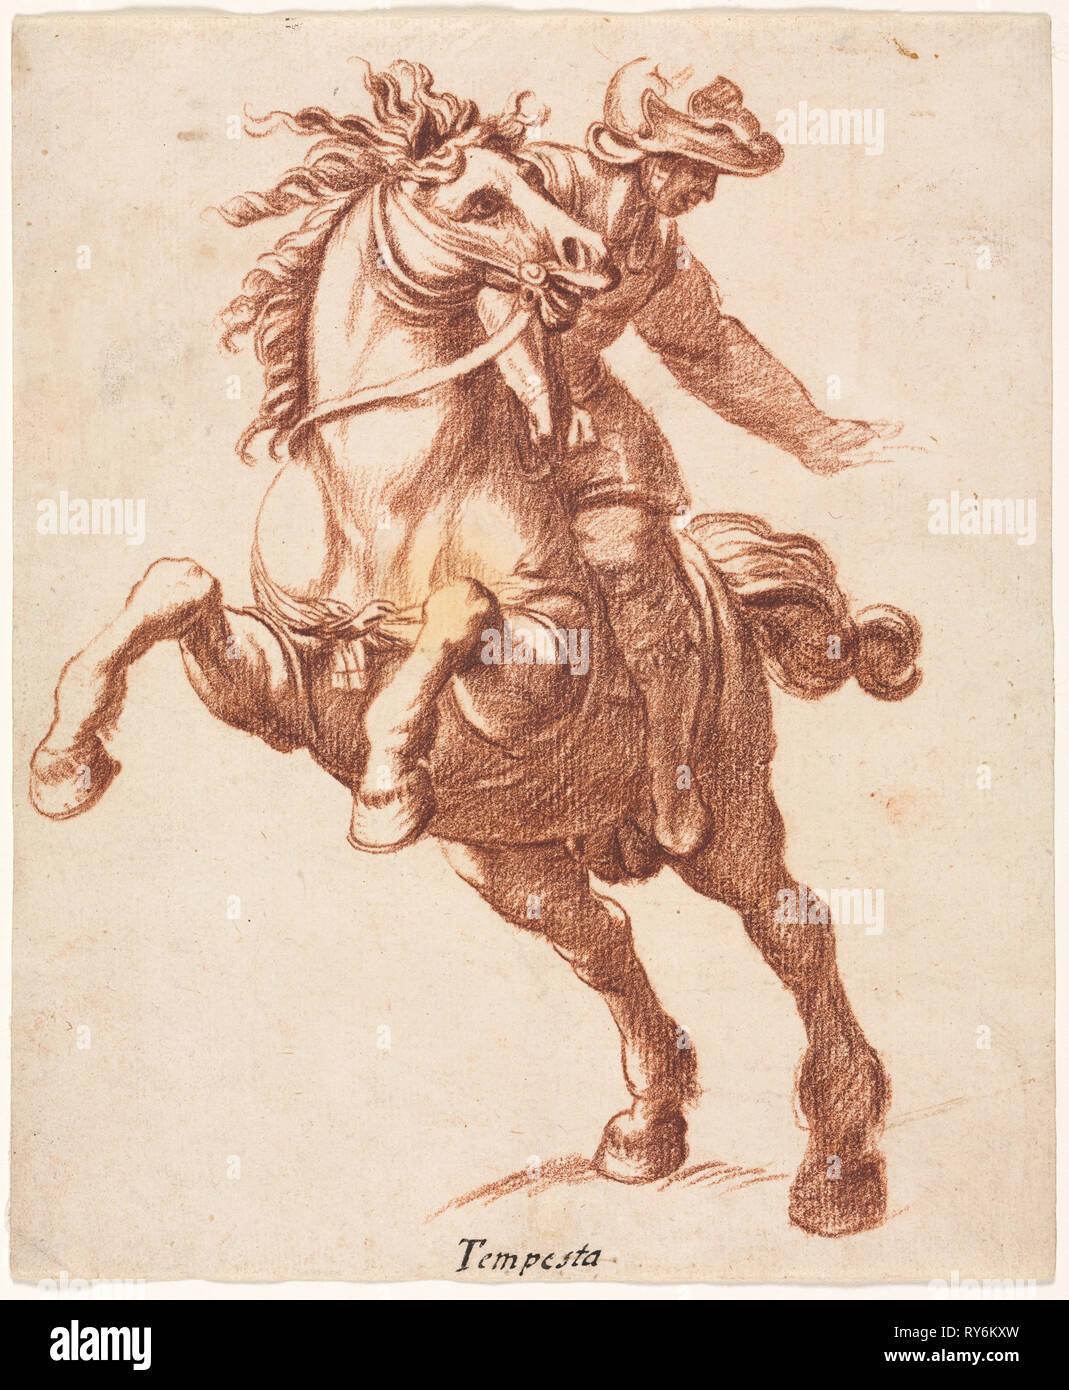 Rearing Horse and Rider, c. 1600?. Attributed to Antonio Tempesta (Italian, 1555-1630). Red chalk; sheet: 20.6 x 17.1 cm (8 1/8 x 6 3/4 in Stock Photo